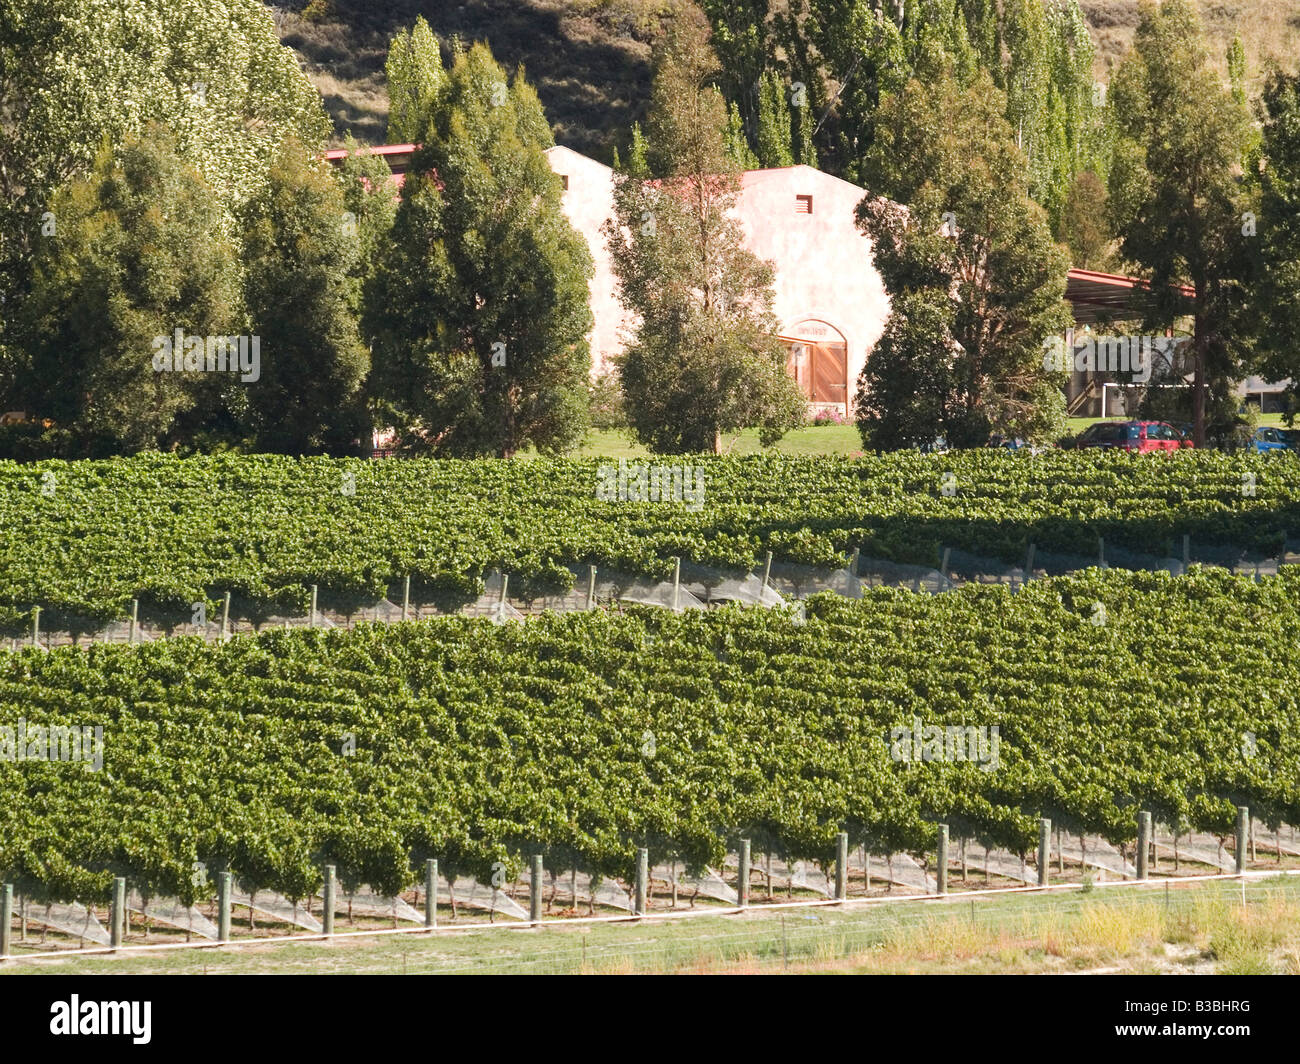 Pinot noir grapevines at Chard Farm vineyard and winery, Central Otago, New Zealand Stock Photo